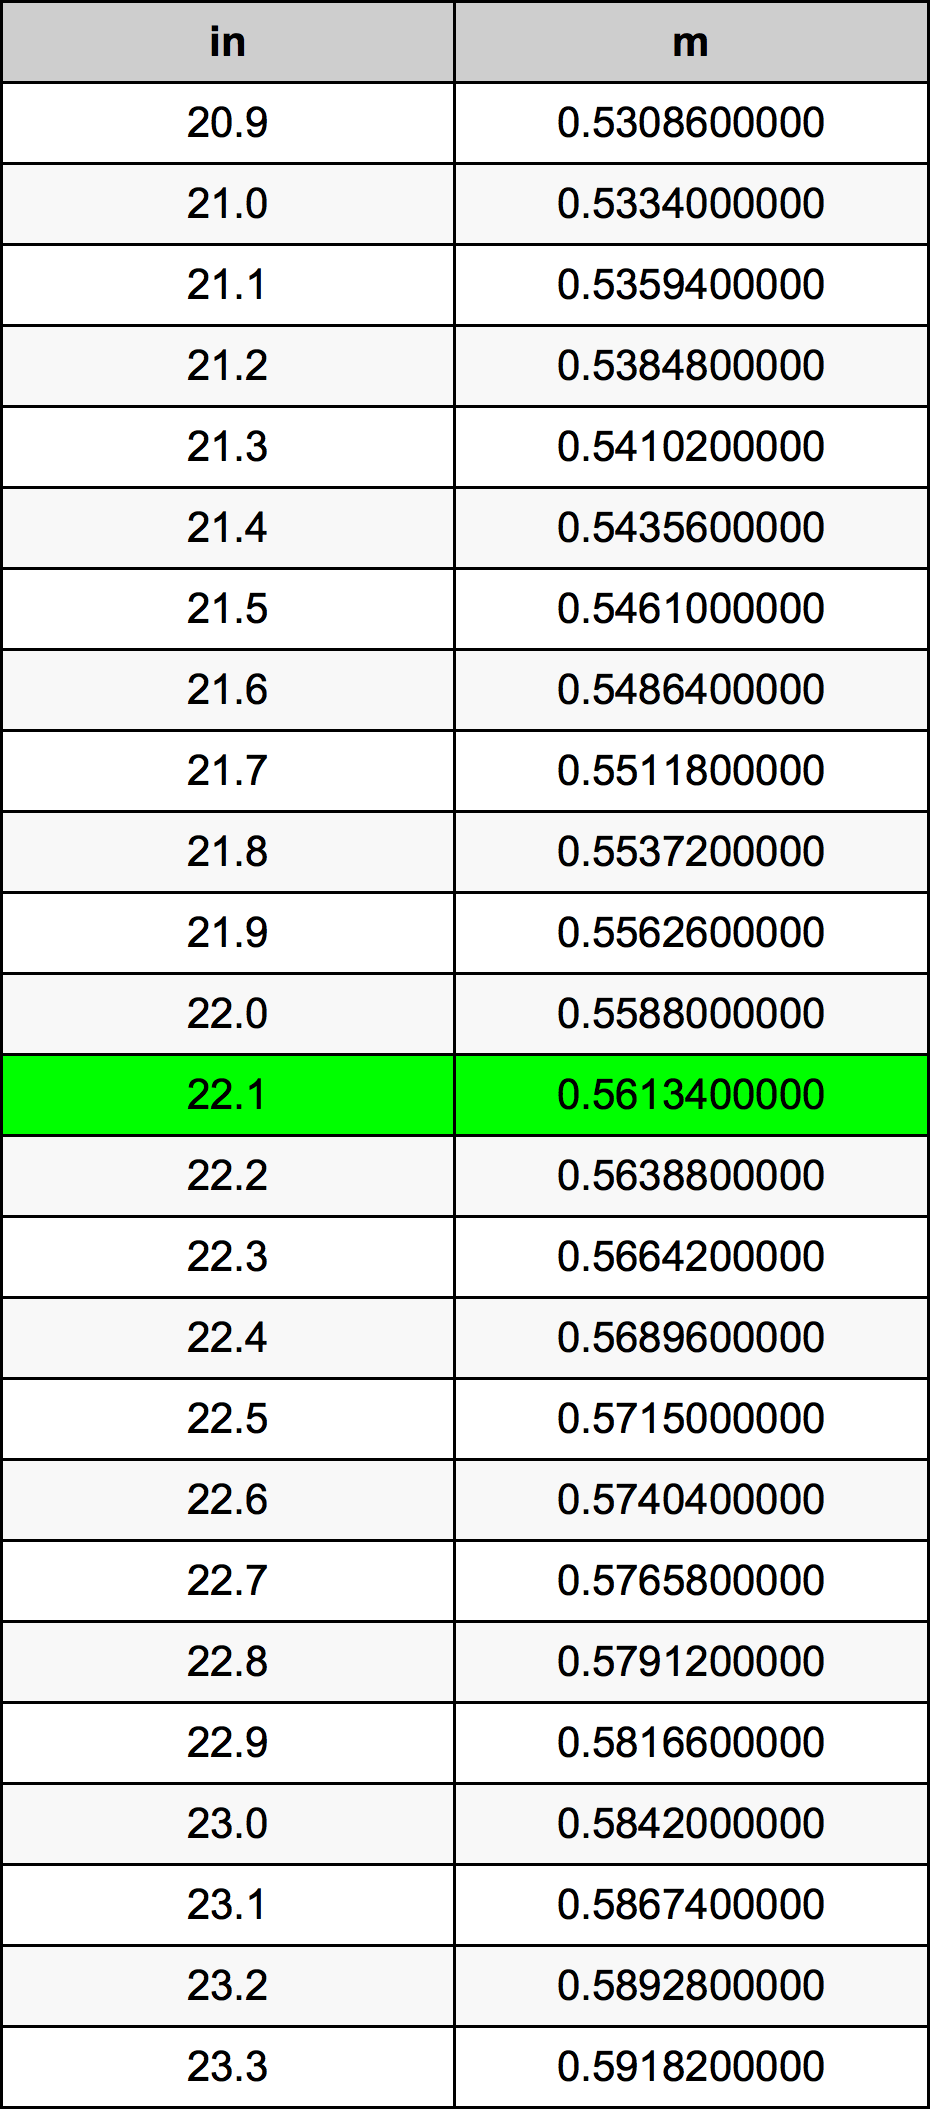 Conversion Chart For Inches To Meters